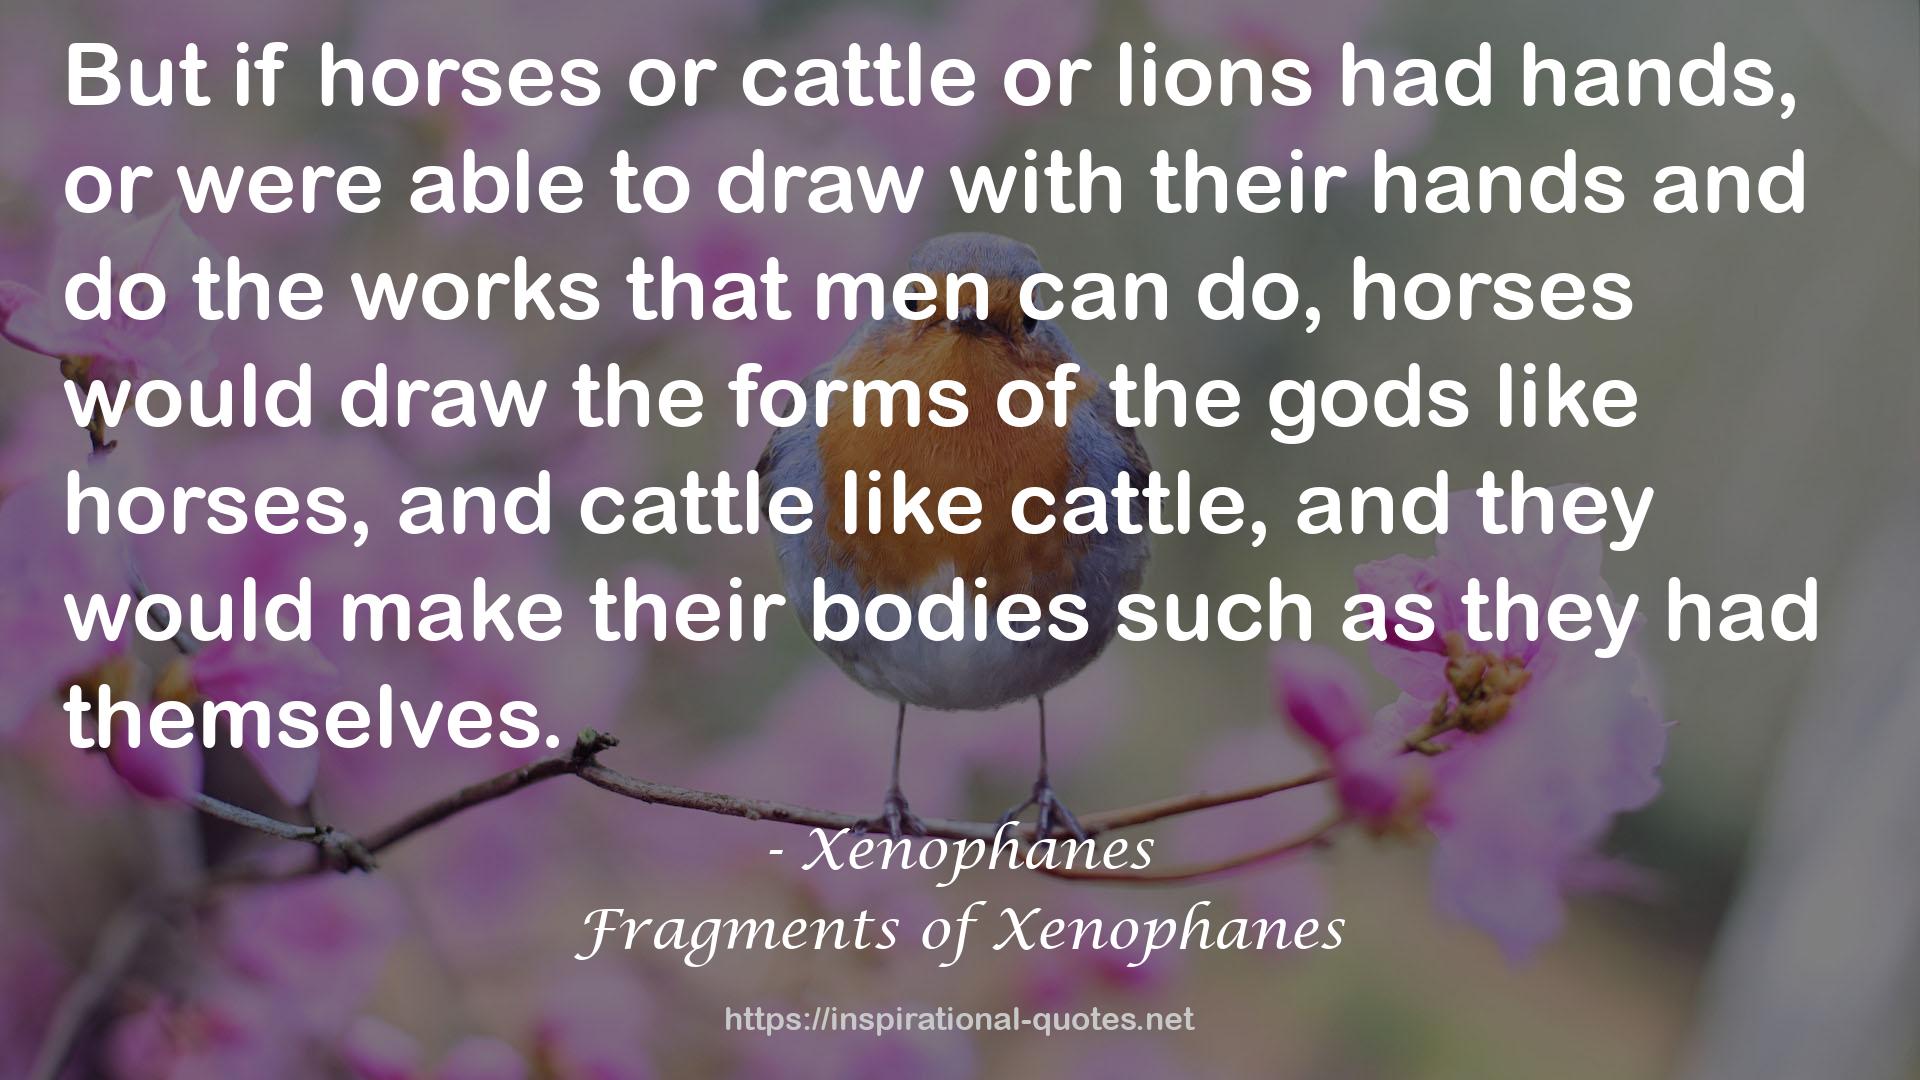 Fragments of Xenophanes QUOTES